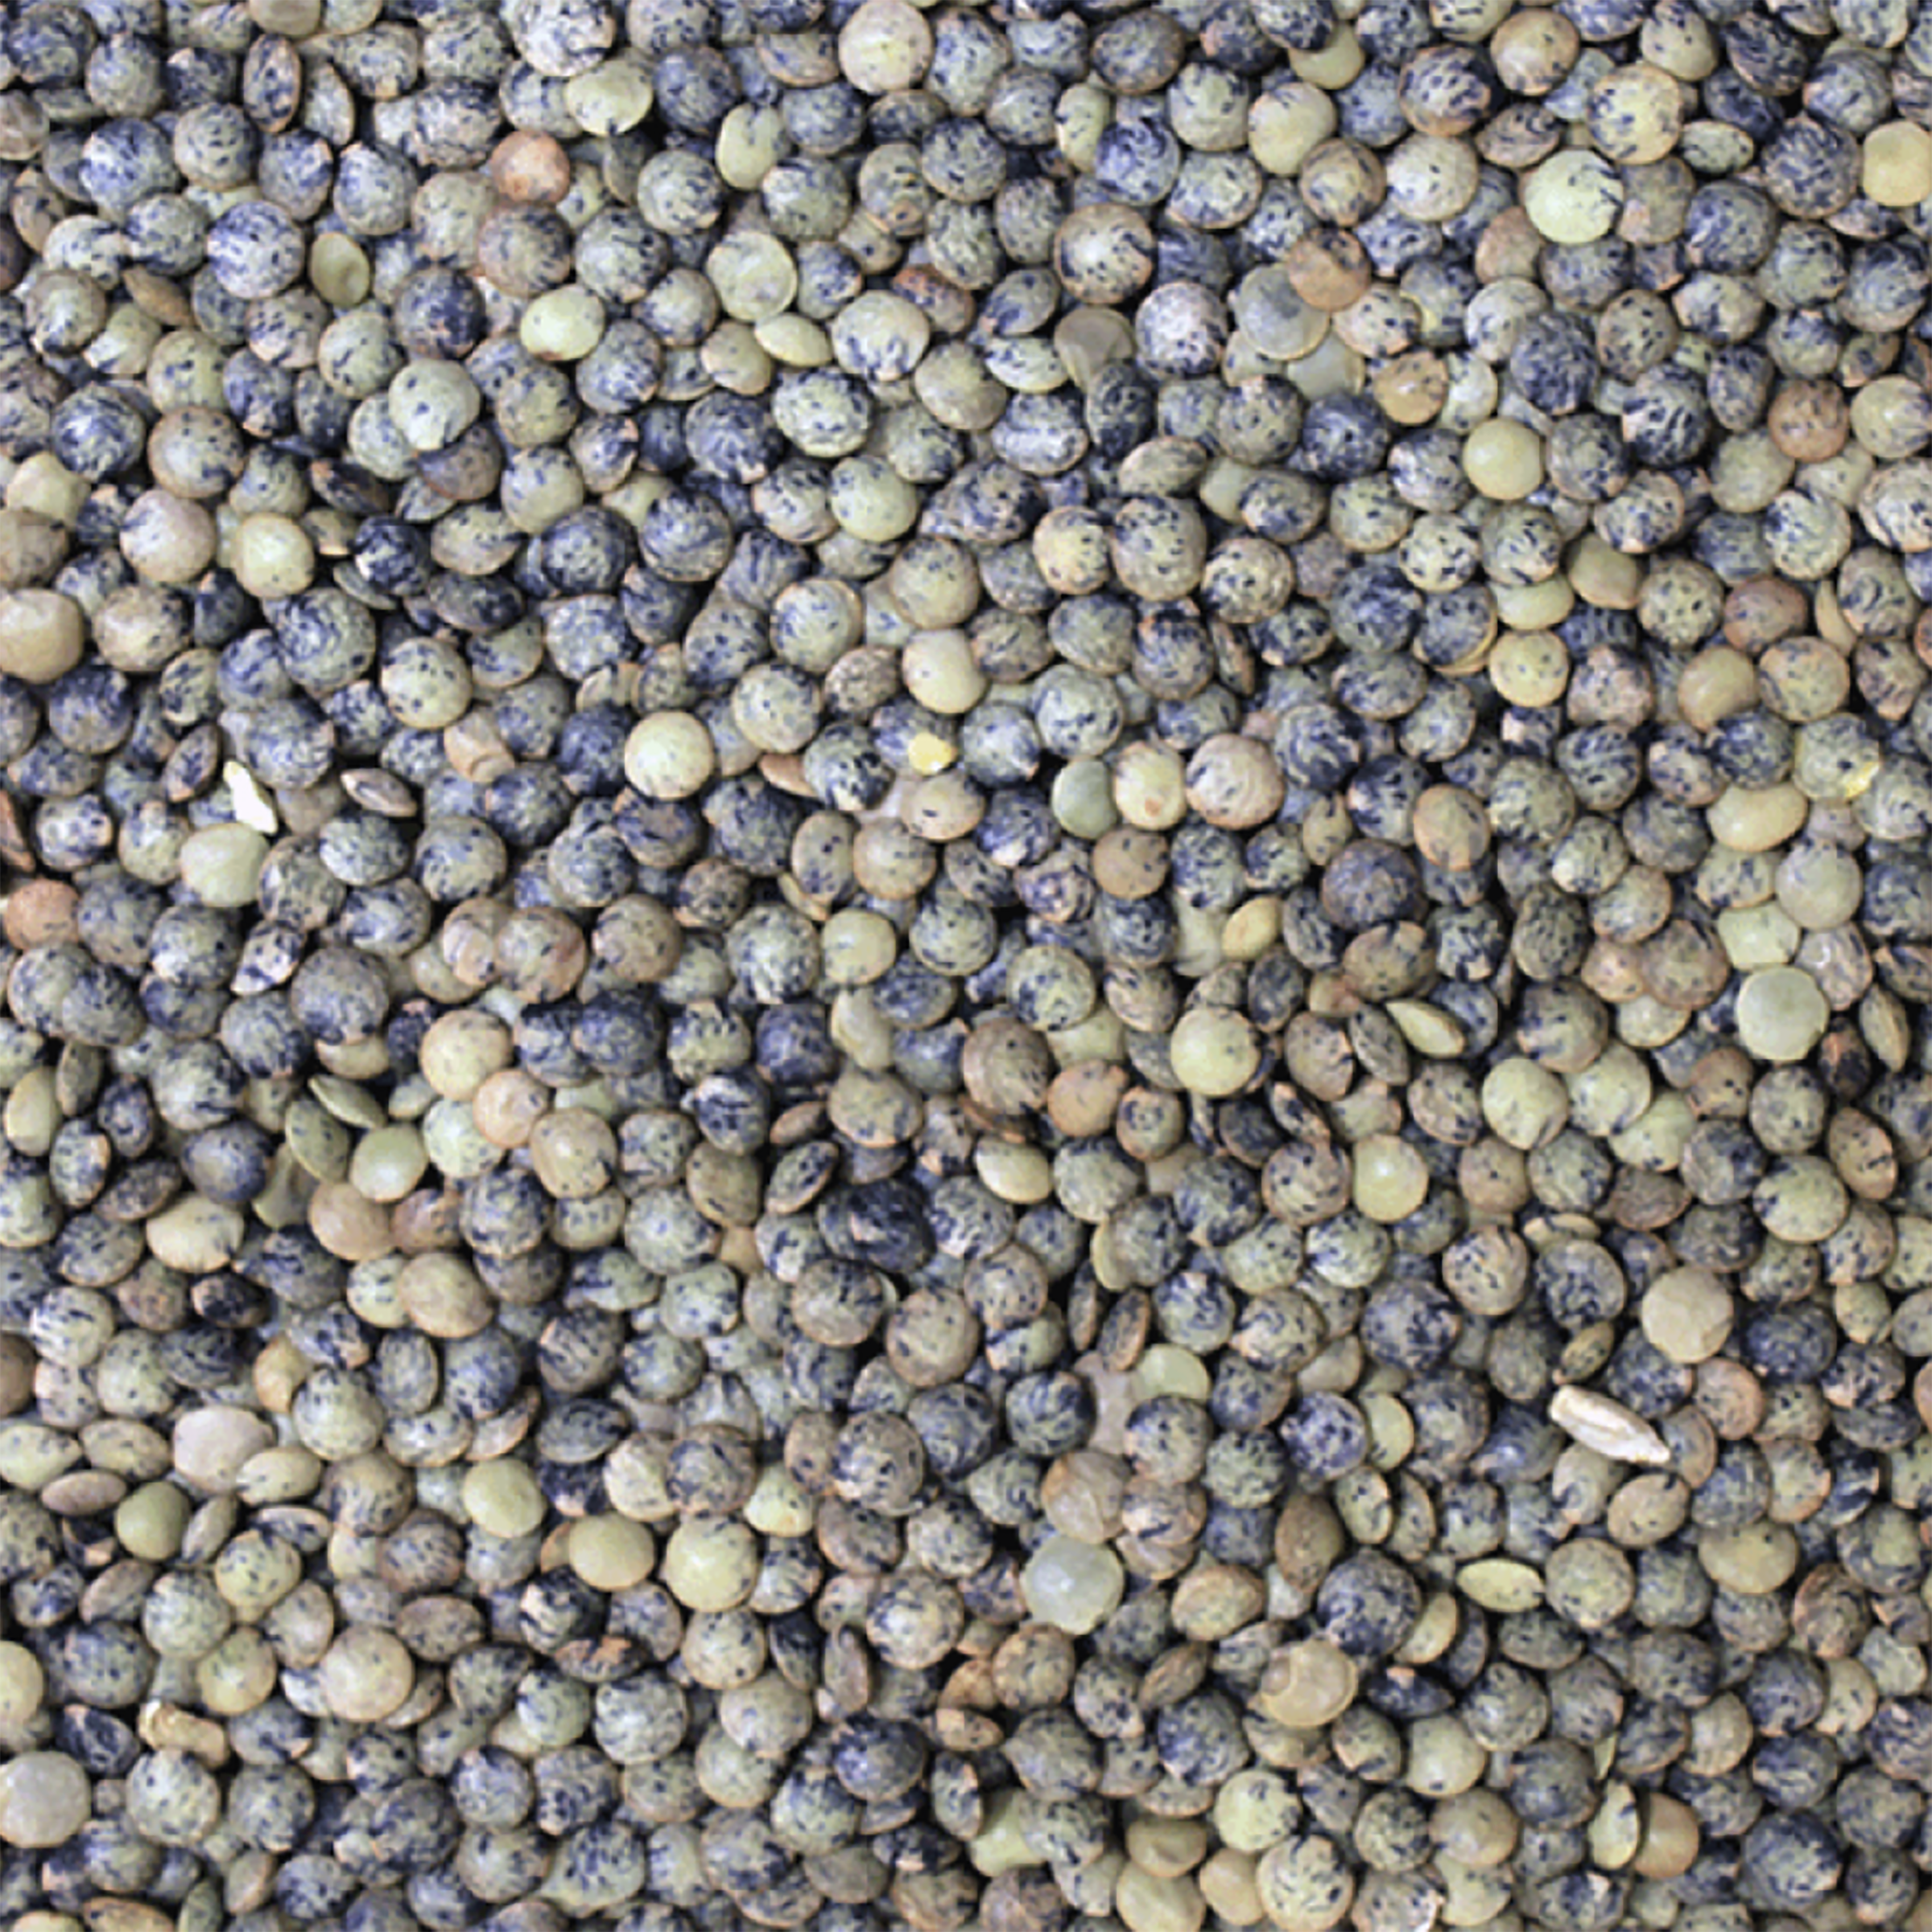 Organic French (Puy Type) Lentils